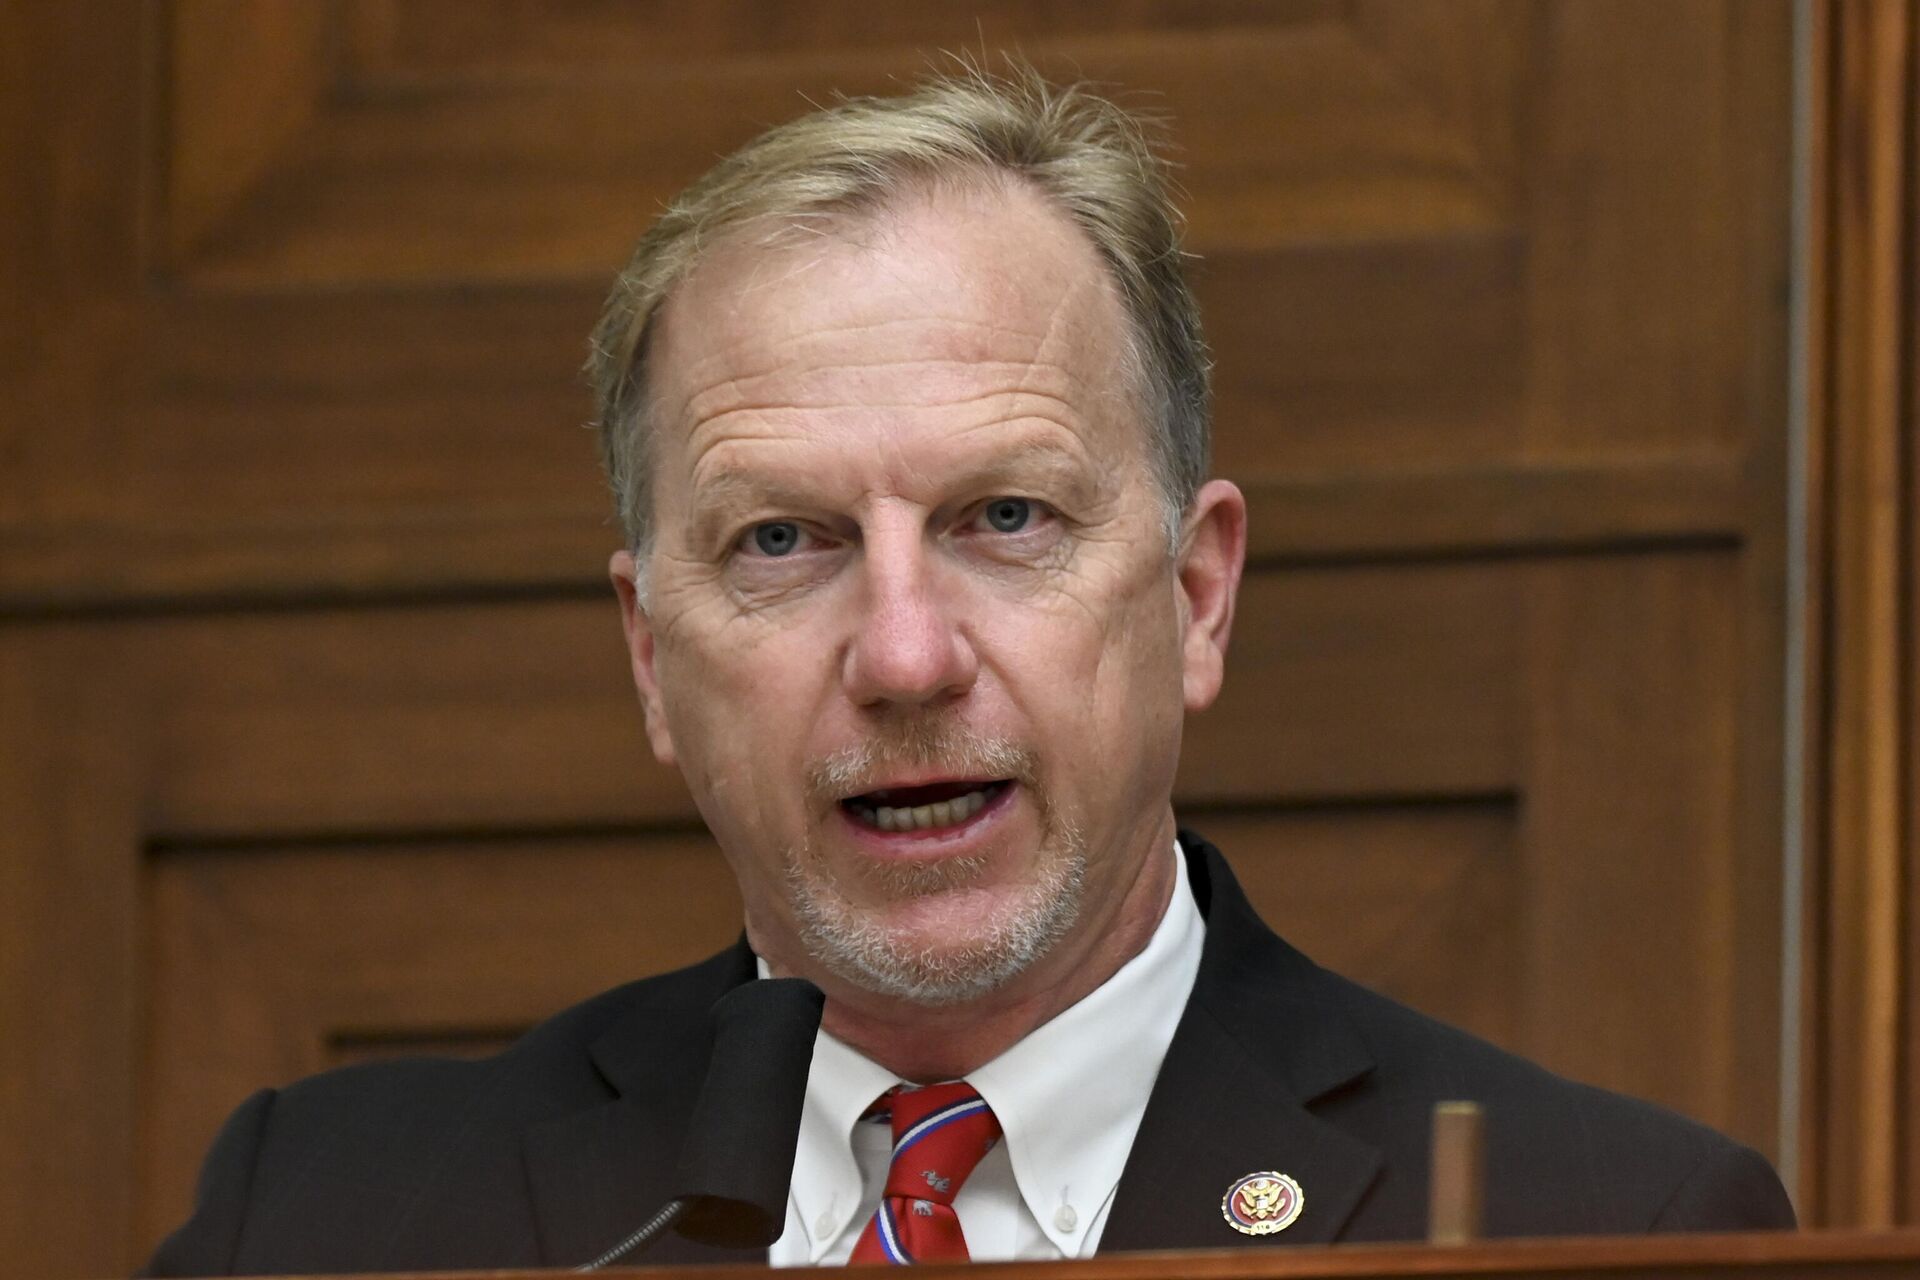 Rep. Kevin Hern, R-Okla., speaks during a House Small Business Committee hearing on oversight of the Small Business Administration and Department of Treasury pandemic programs on Capitol Hill in Washington, July 17, 2020. - Sputnik International, 1920, 04.10.2023